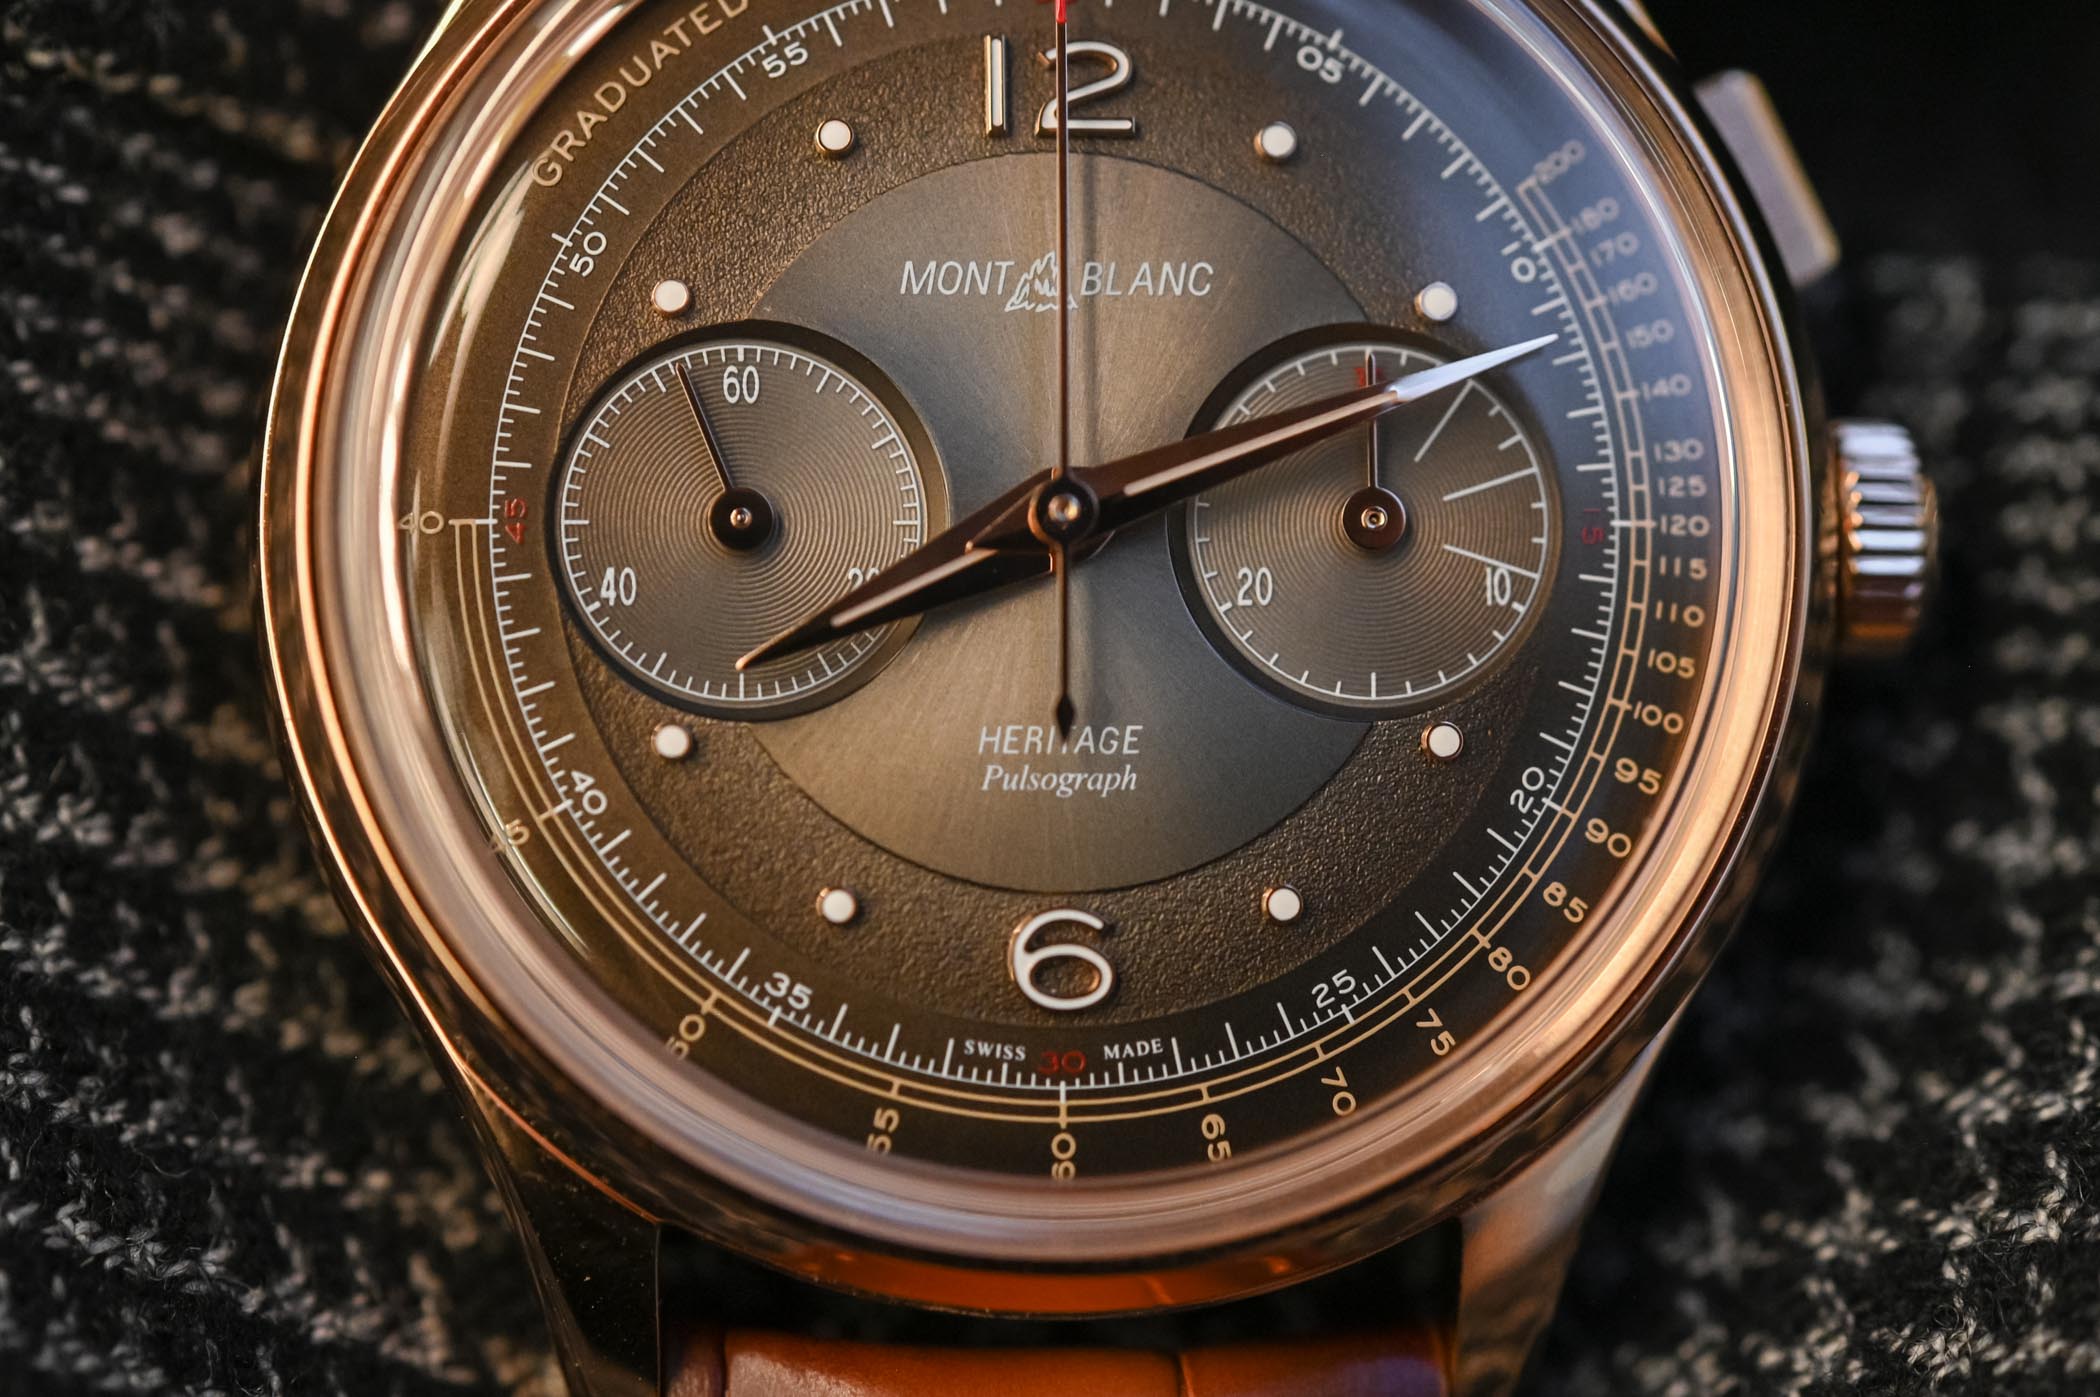 Montblanc Heritage Manufacture Pulsograph Rose Gold Brown Dial 126095